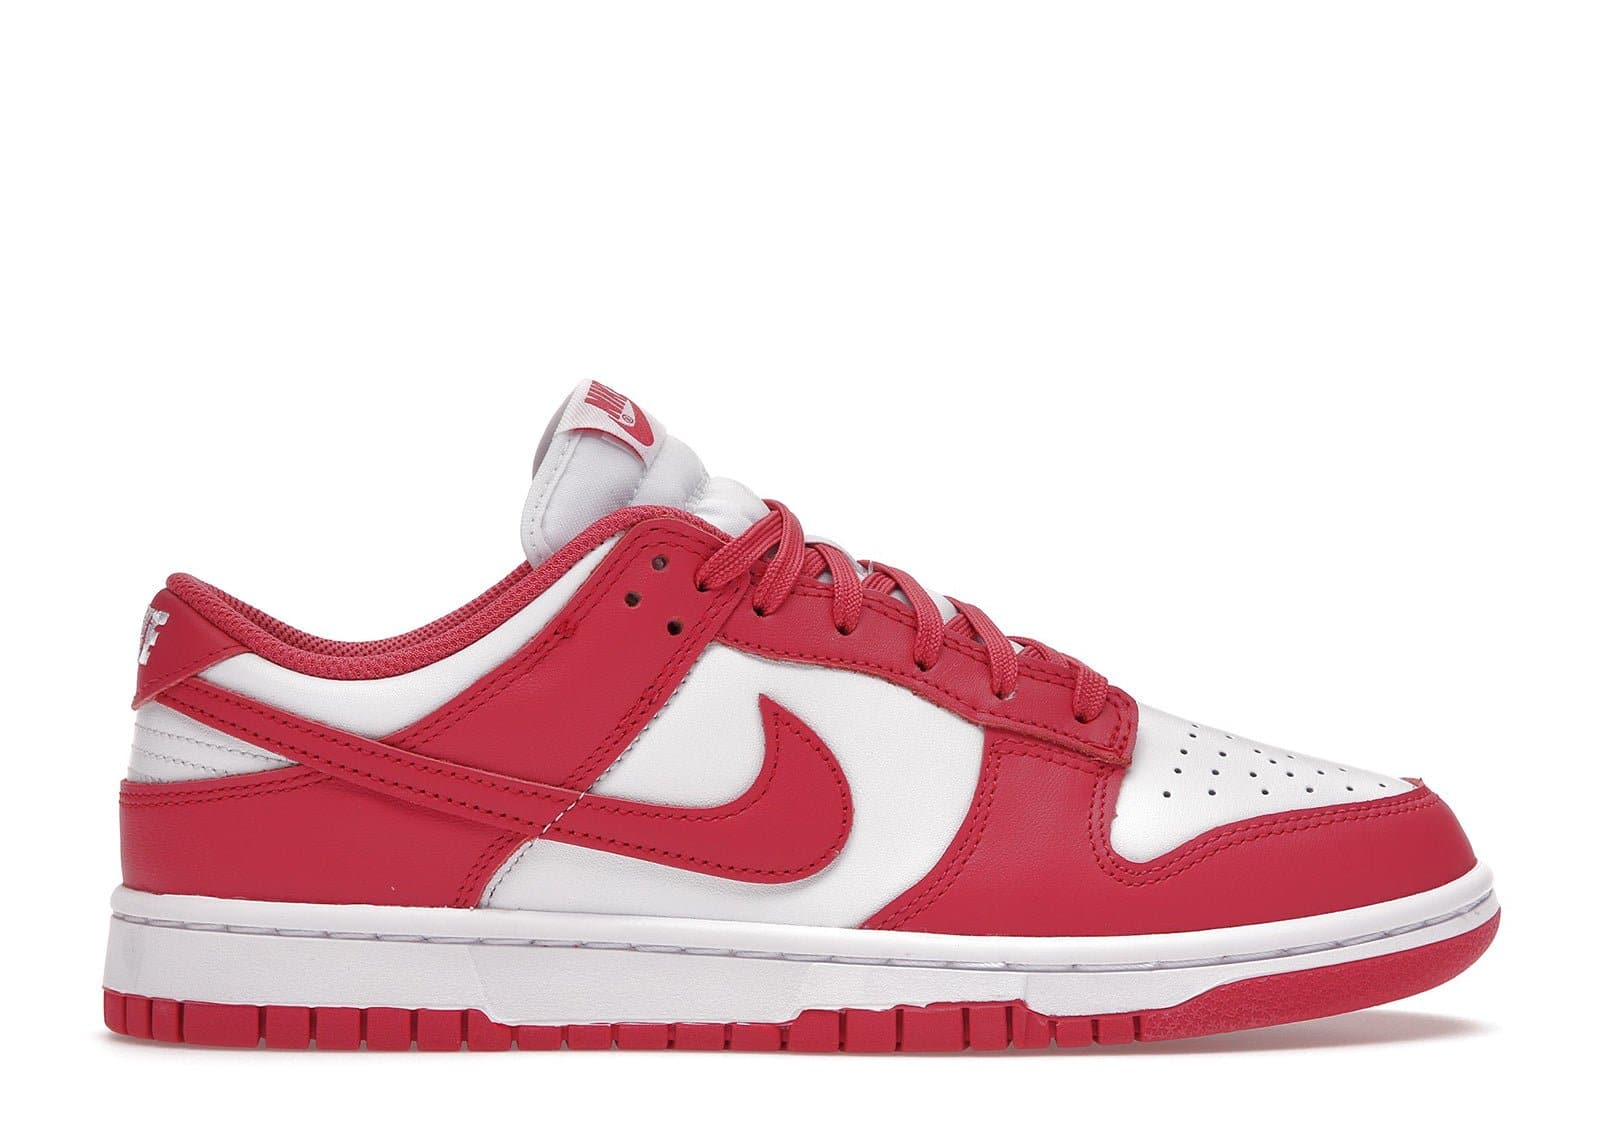 Nike Dunk Low Archeo Pink (Women's) - The Magnolia Park